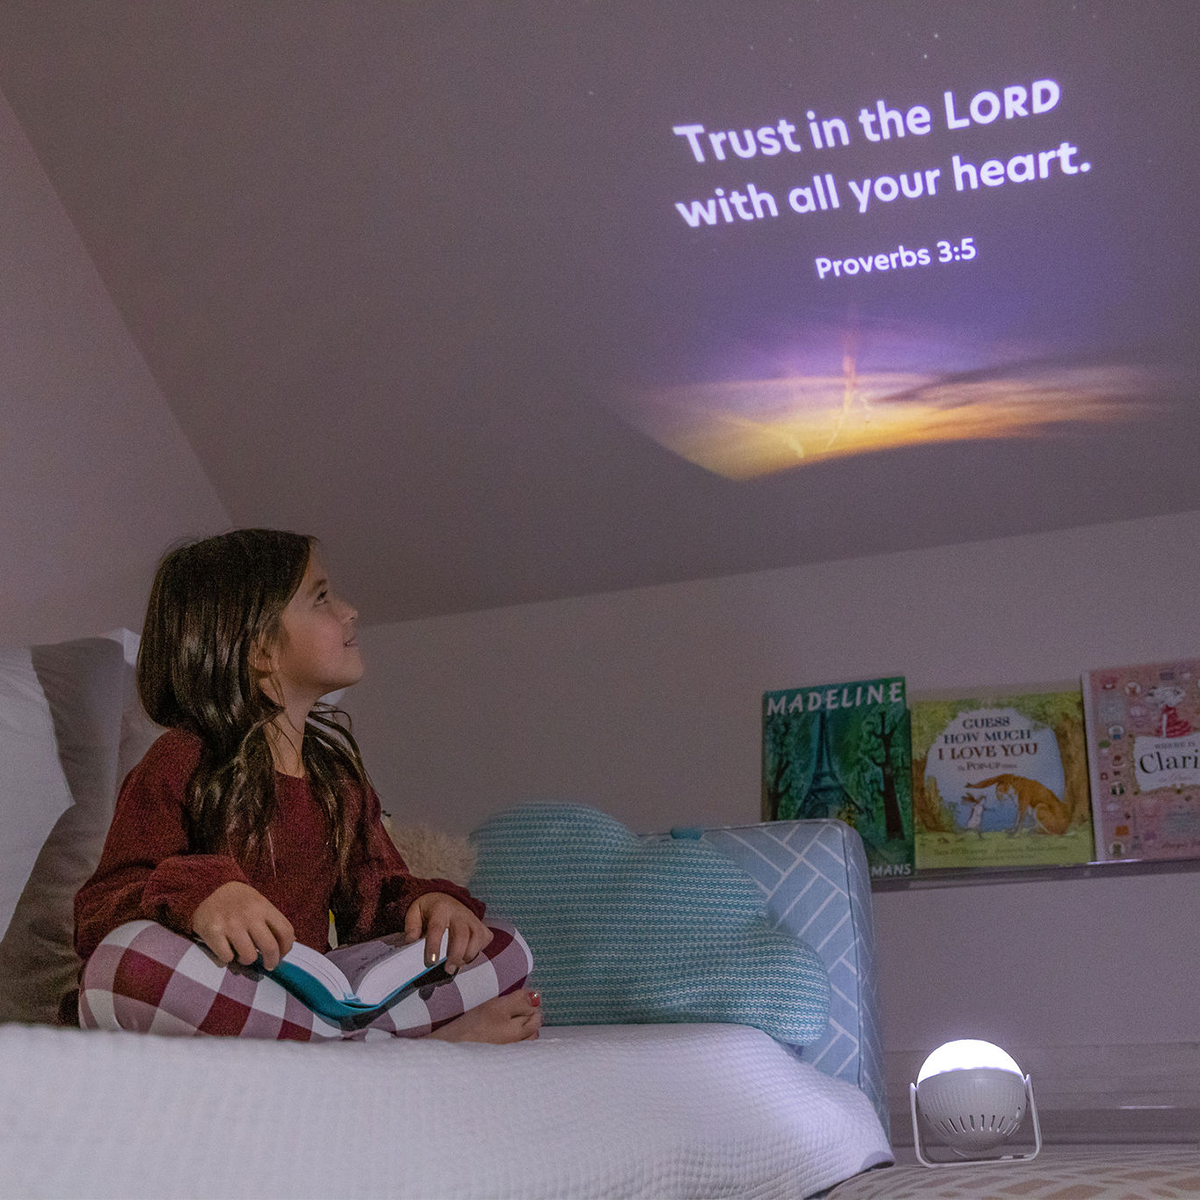 Young 5 year old girl sitting on a bed looking up at the ceiling.  the Glorilight projector is on and shining a night sky image on the ceiling.  The text includes white copy that reads Trust in the Lord with all your heart. Proverbs 3:5.